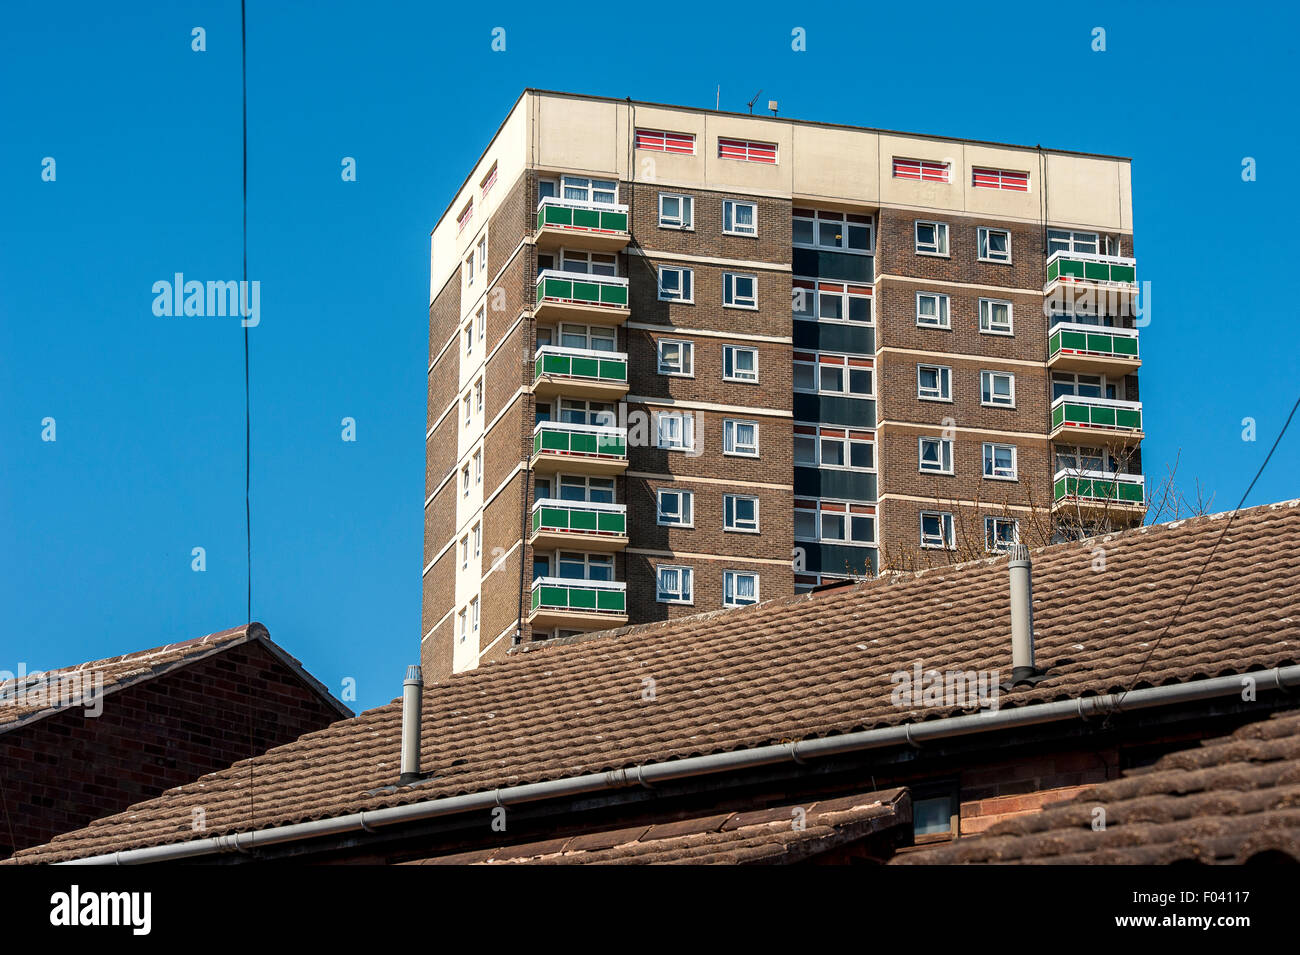 High rise flats in an English city. Stock Photo